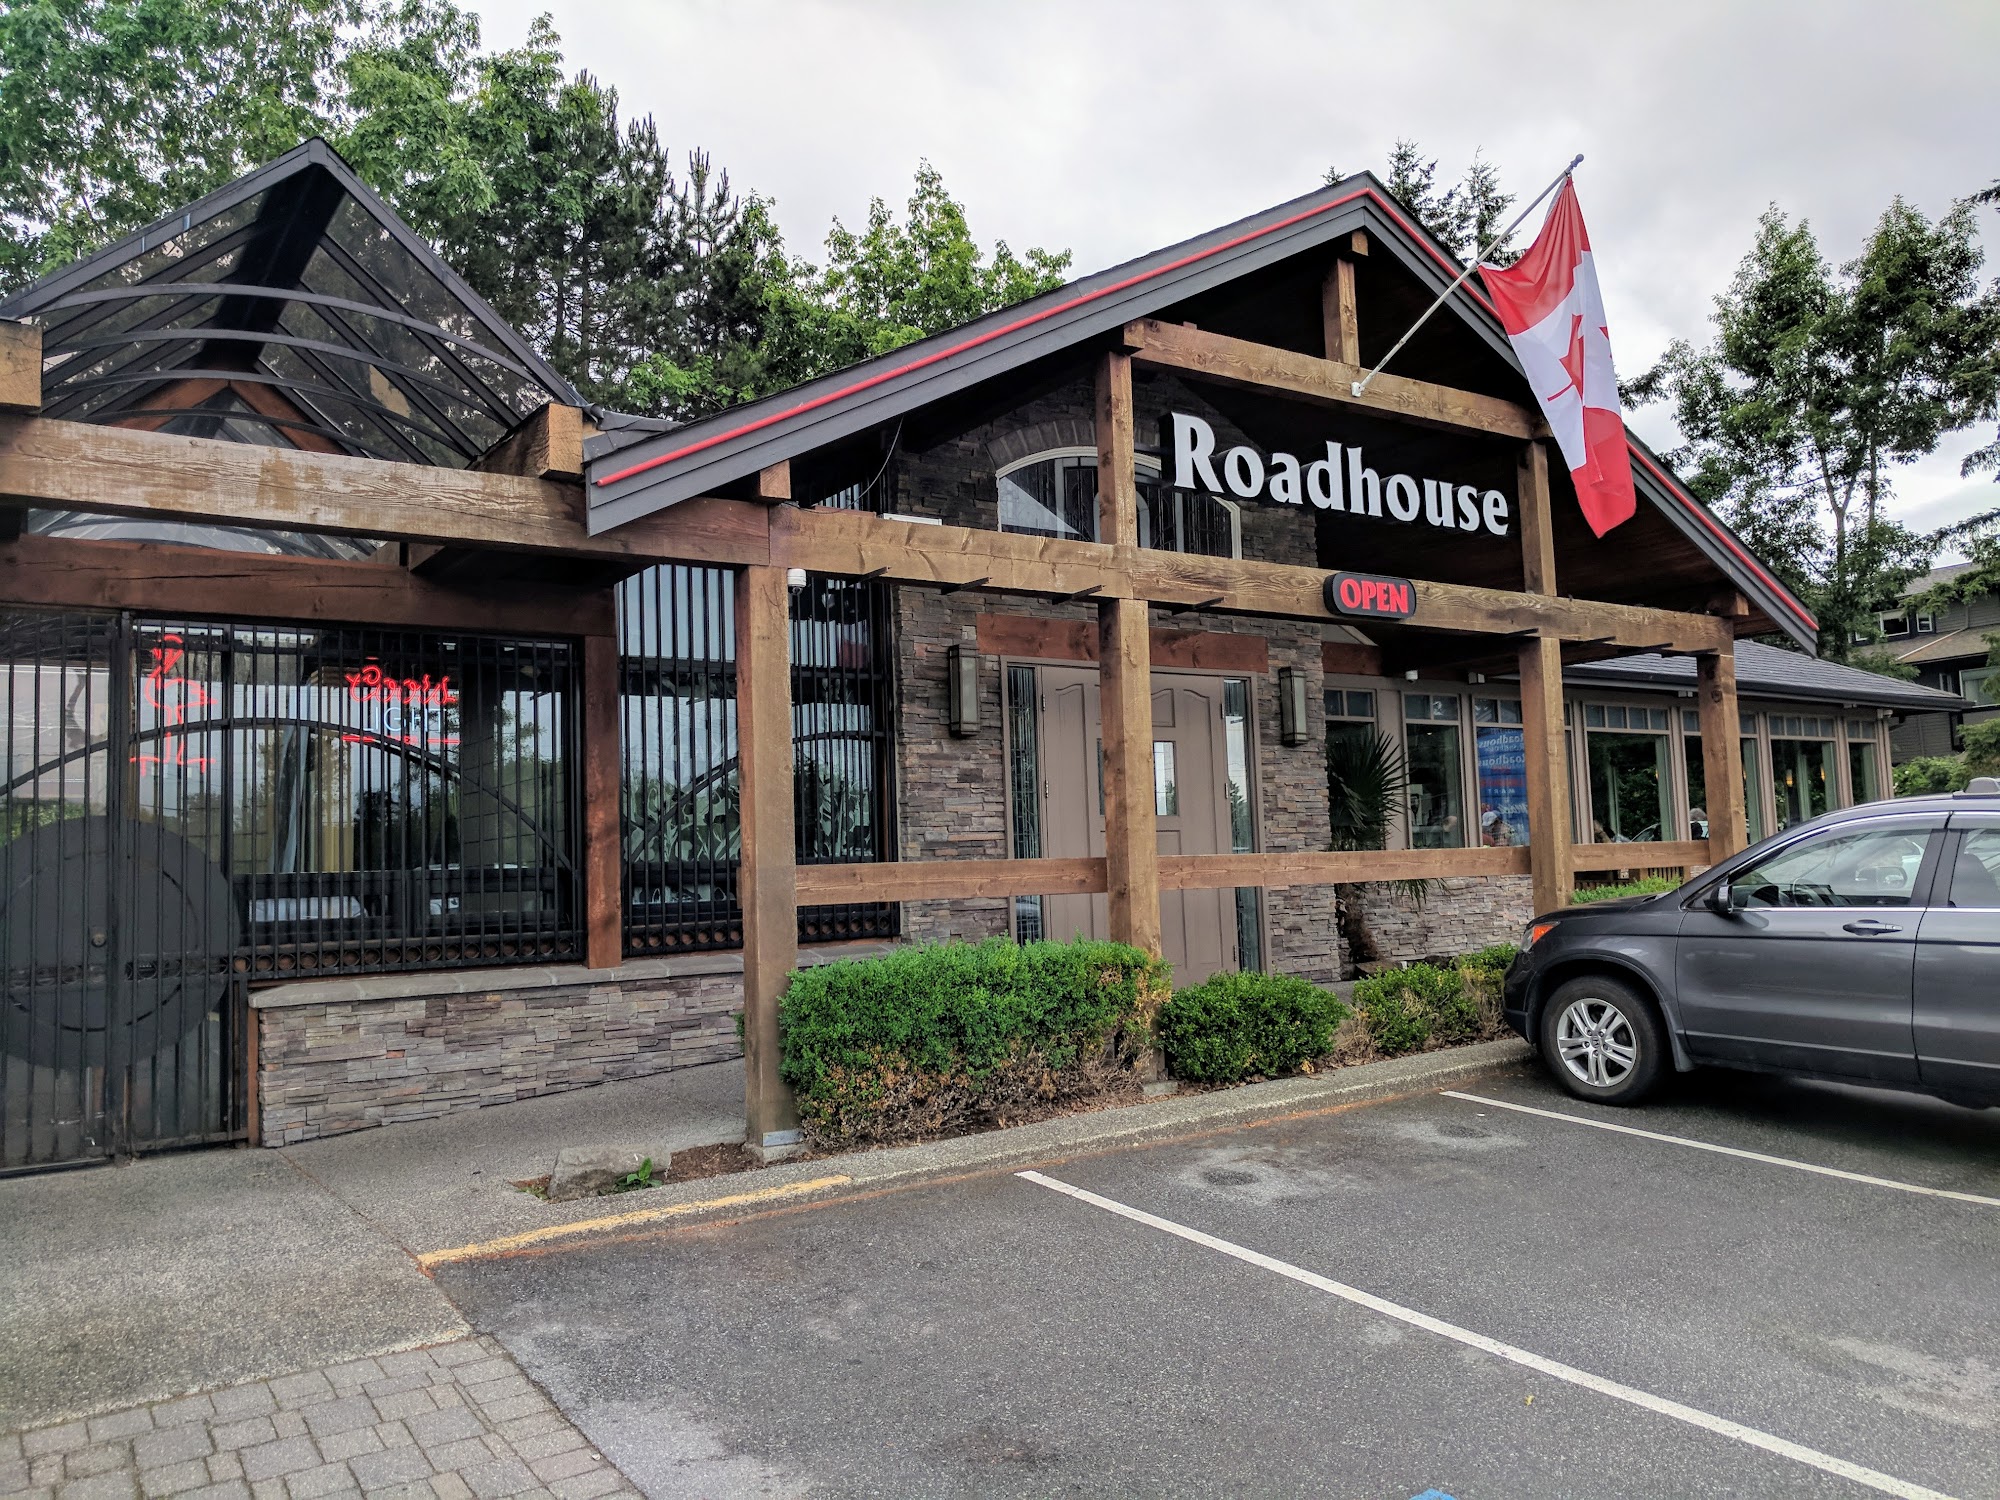 The Roadhouse Grille